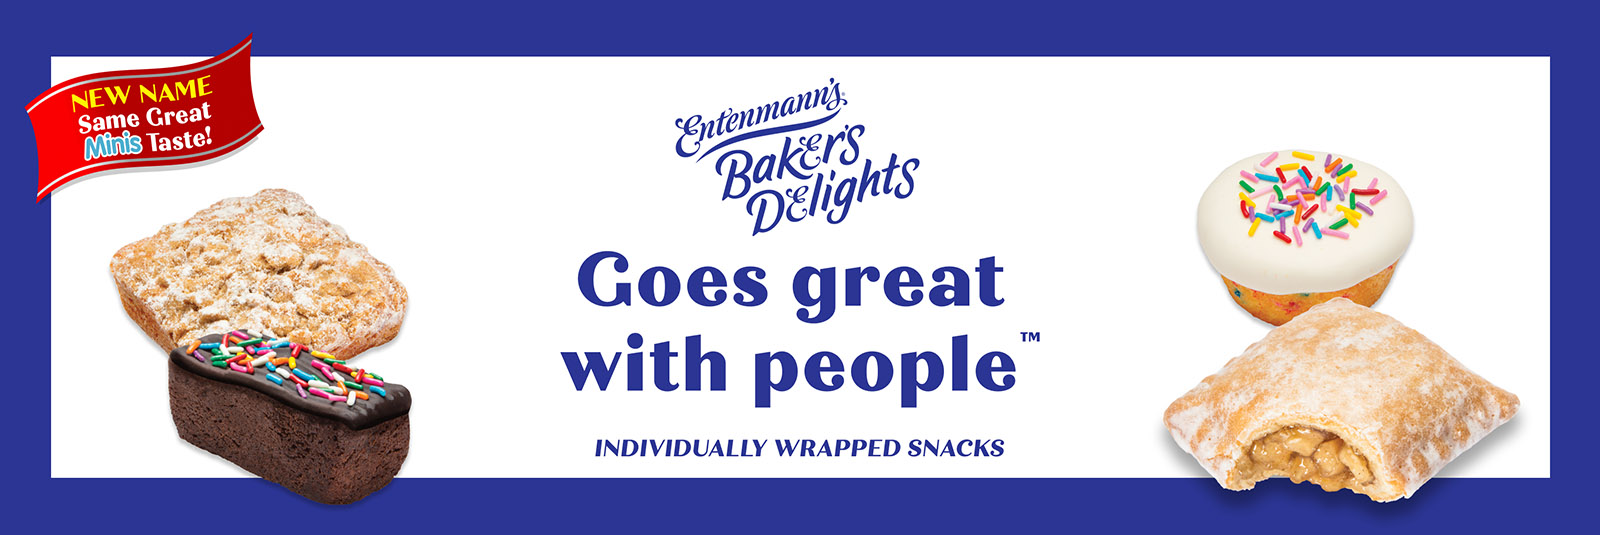 Entenmann's Baker's Delights. Goes great with people. Individually wrapped snacks